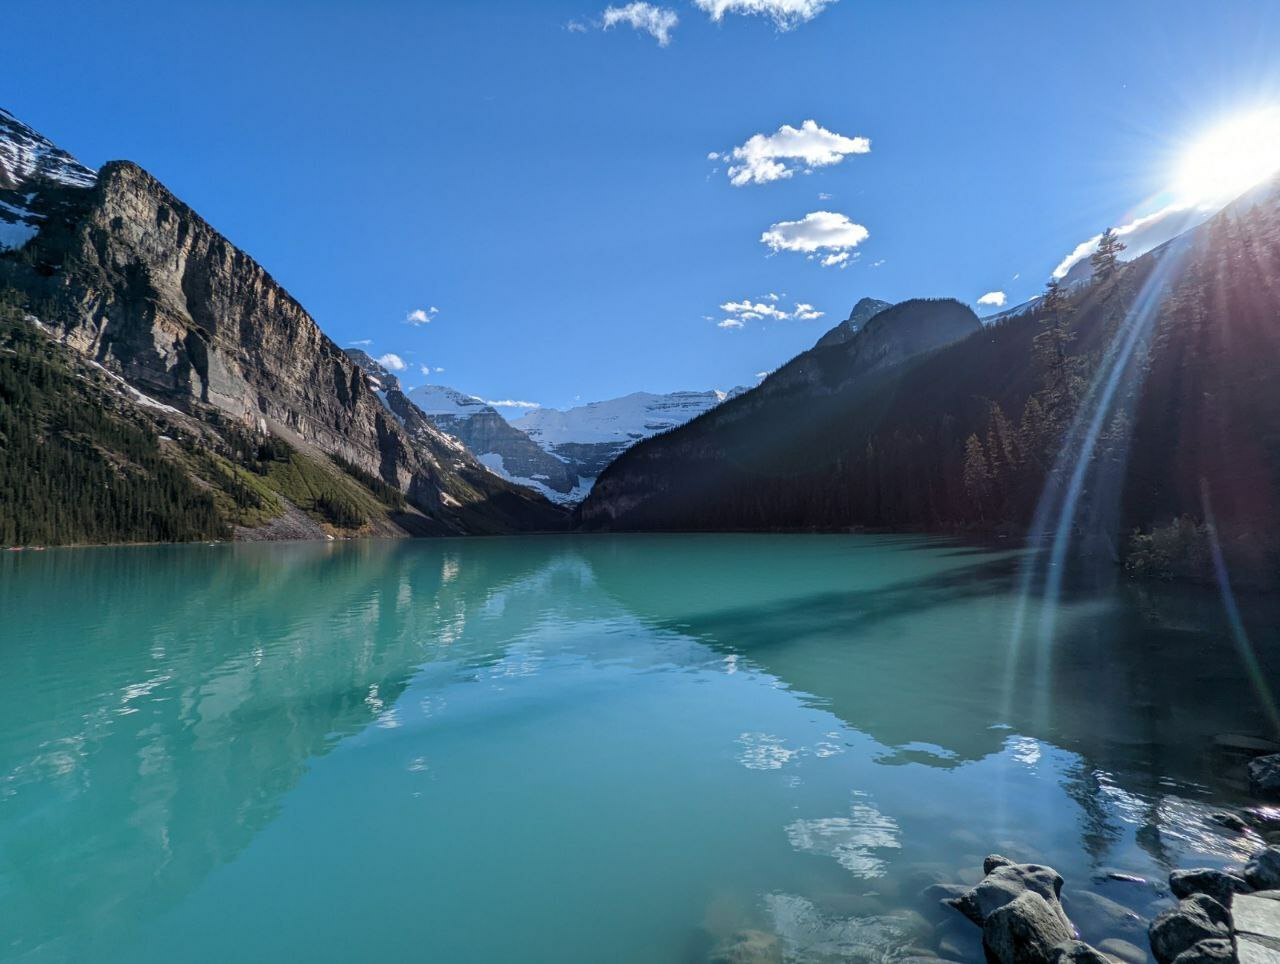 <span style="font-weight: bold;">Lake Louise</span><br>